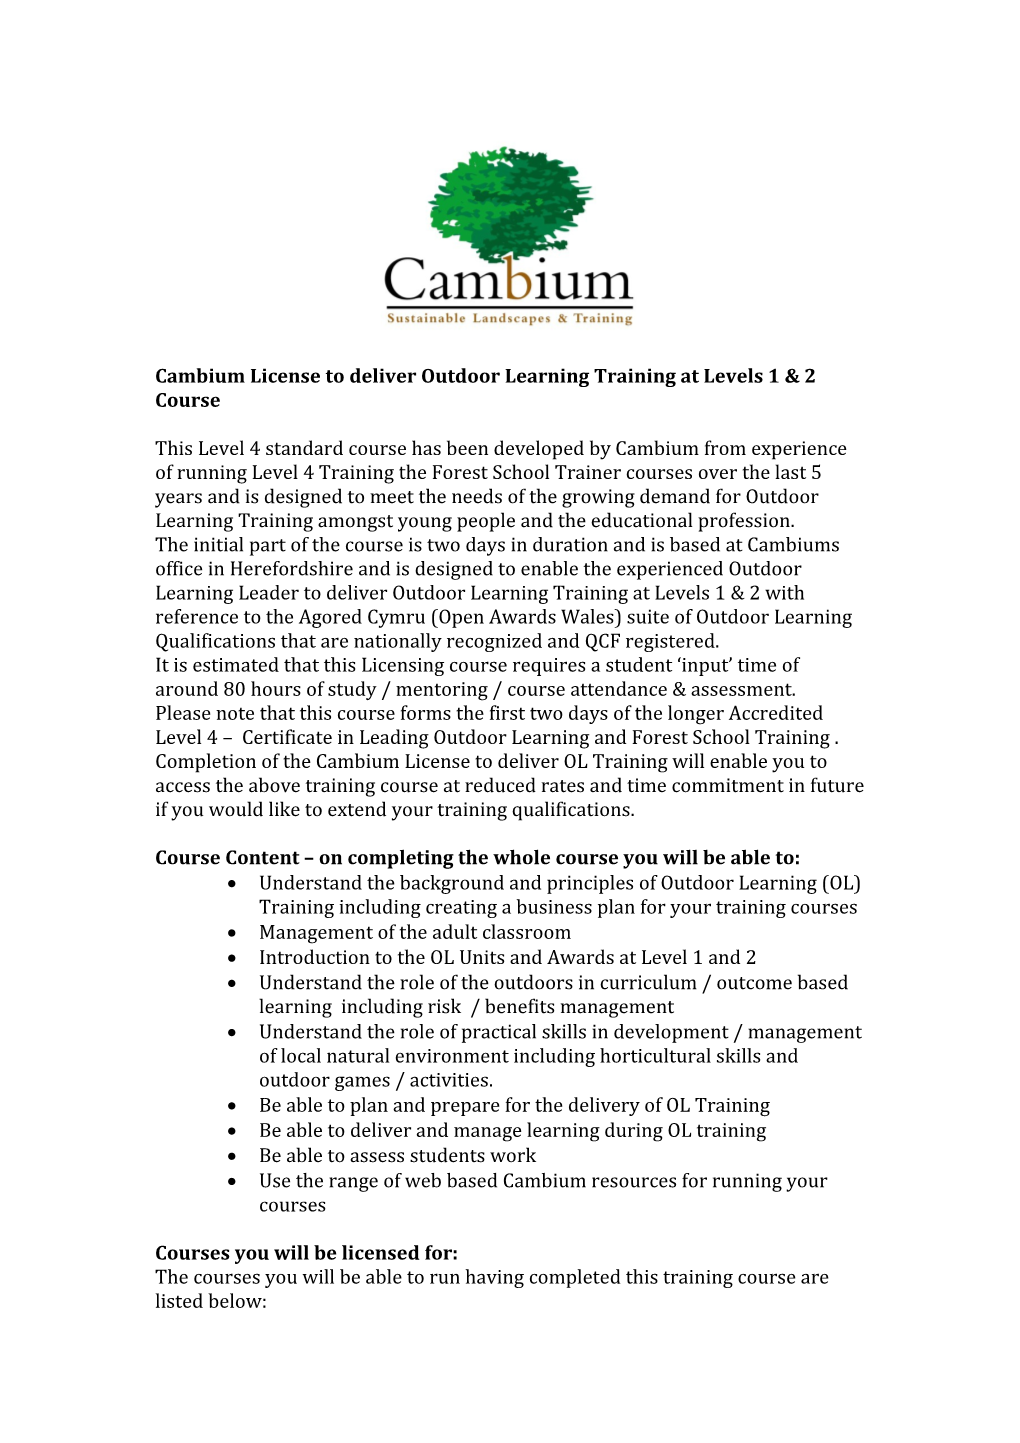 Cambium License to Deliver Outdoor Learning Training at Levels 1 & 2 Course